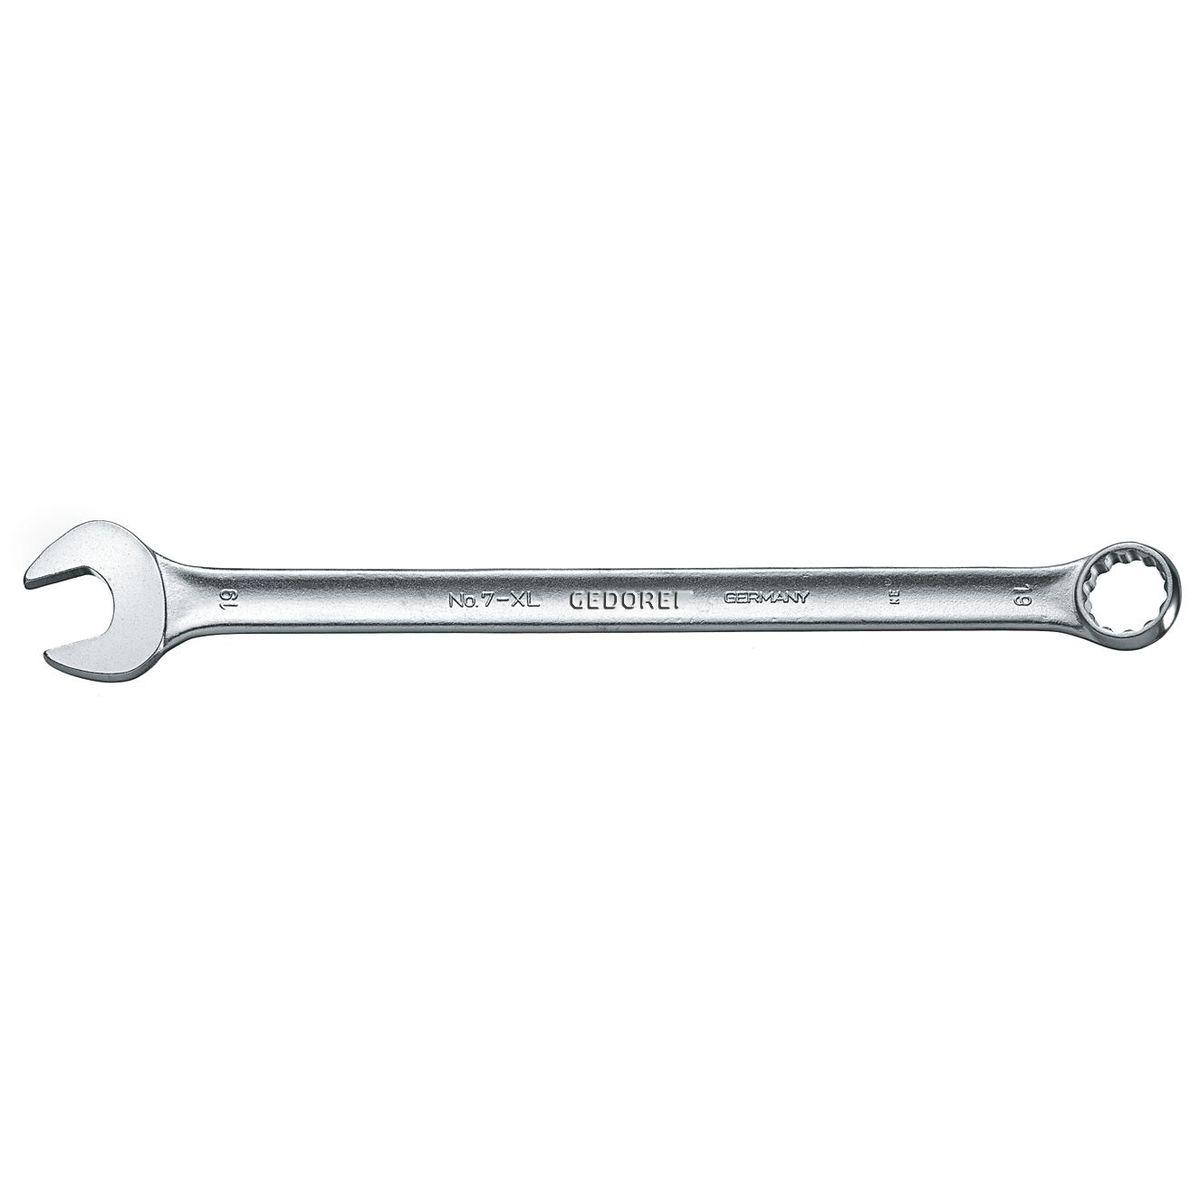 Combination spanner, extra long 12mm No.7 XL 12 Gedore